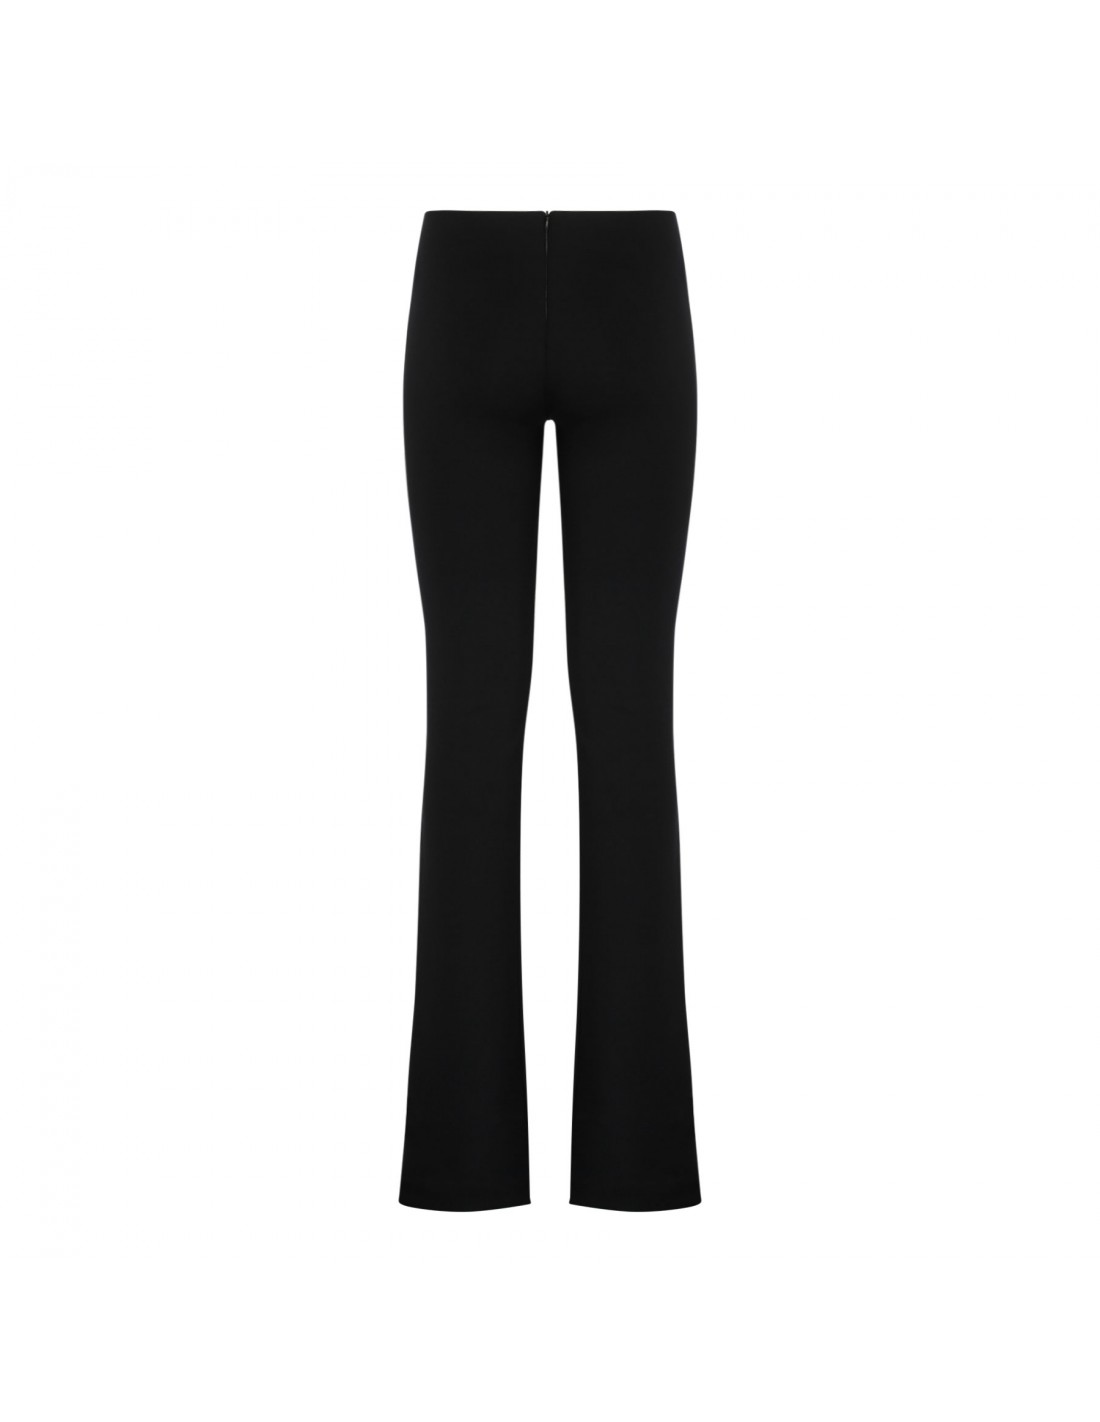 Black fitted pants